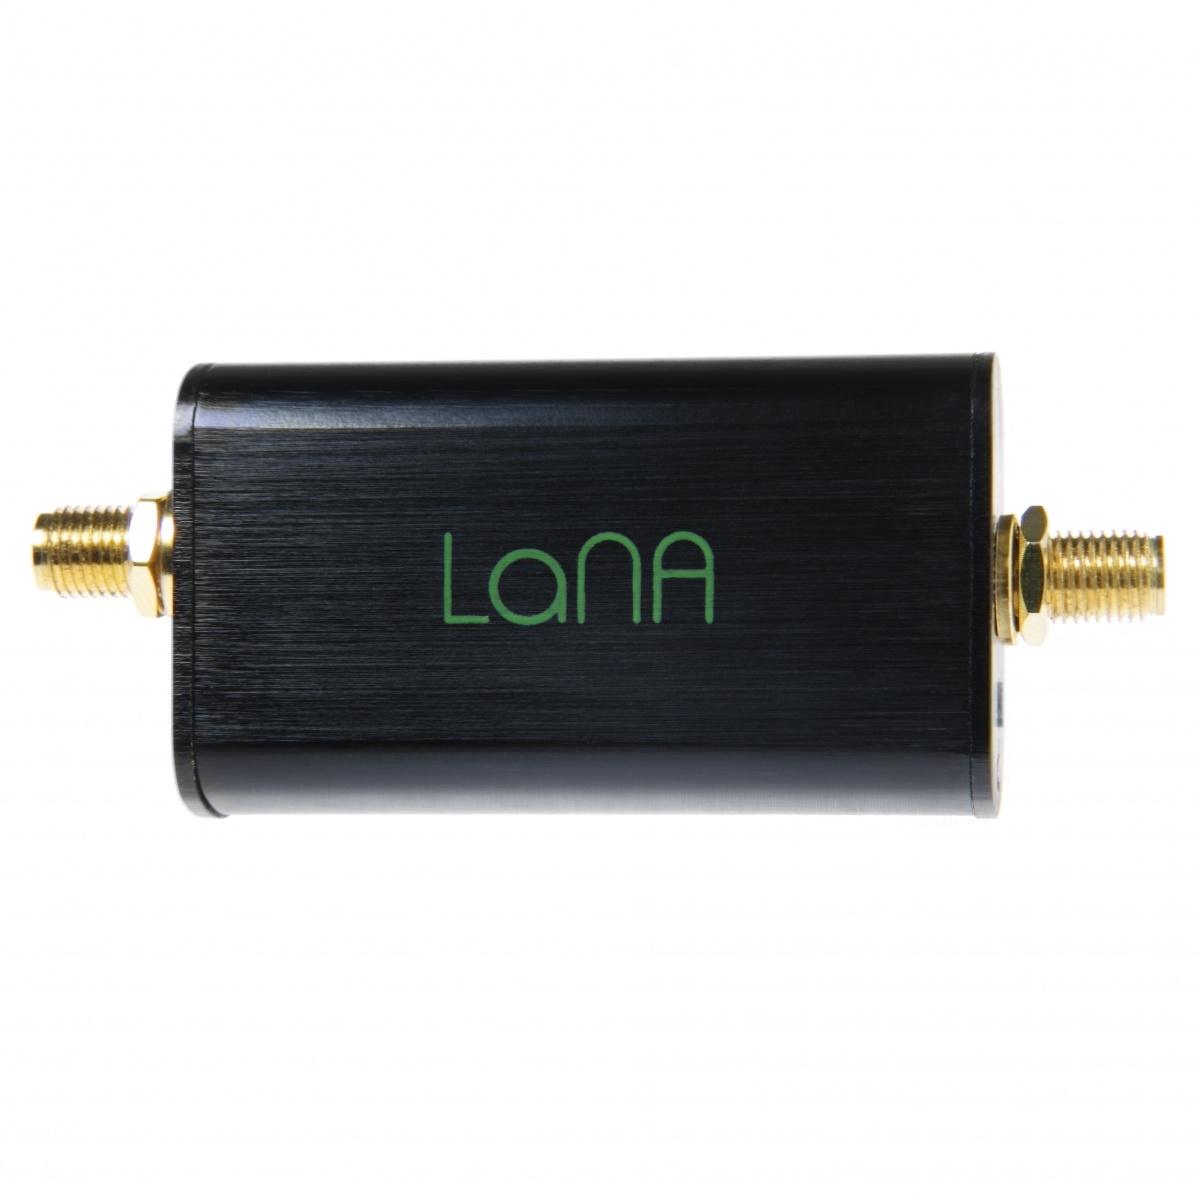 Module for RF & Software Defined Radio Wideband 20MHz-4000MHz Frequency Capability with Bias Tee & USB Power Options Ultra Low-Noise Amplifier LNA with Enclosure & Accessories Nooelec Lana SDR 